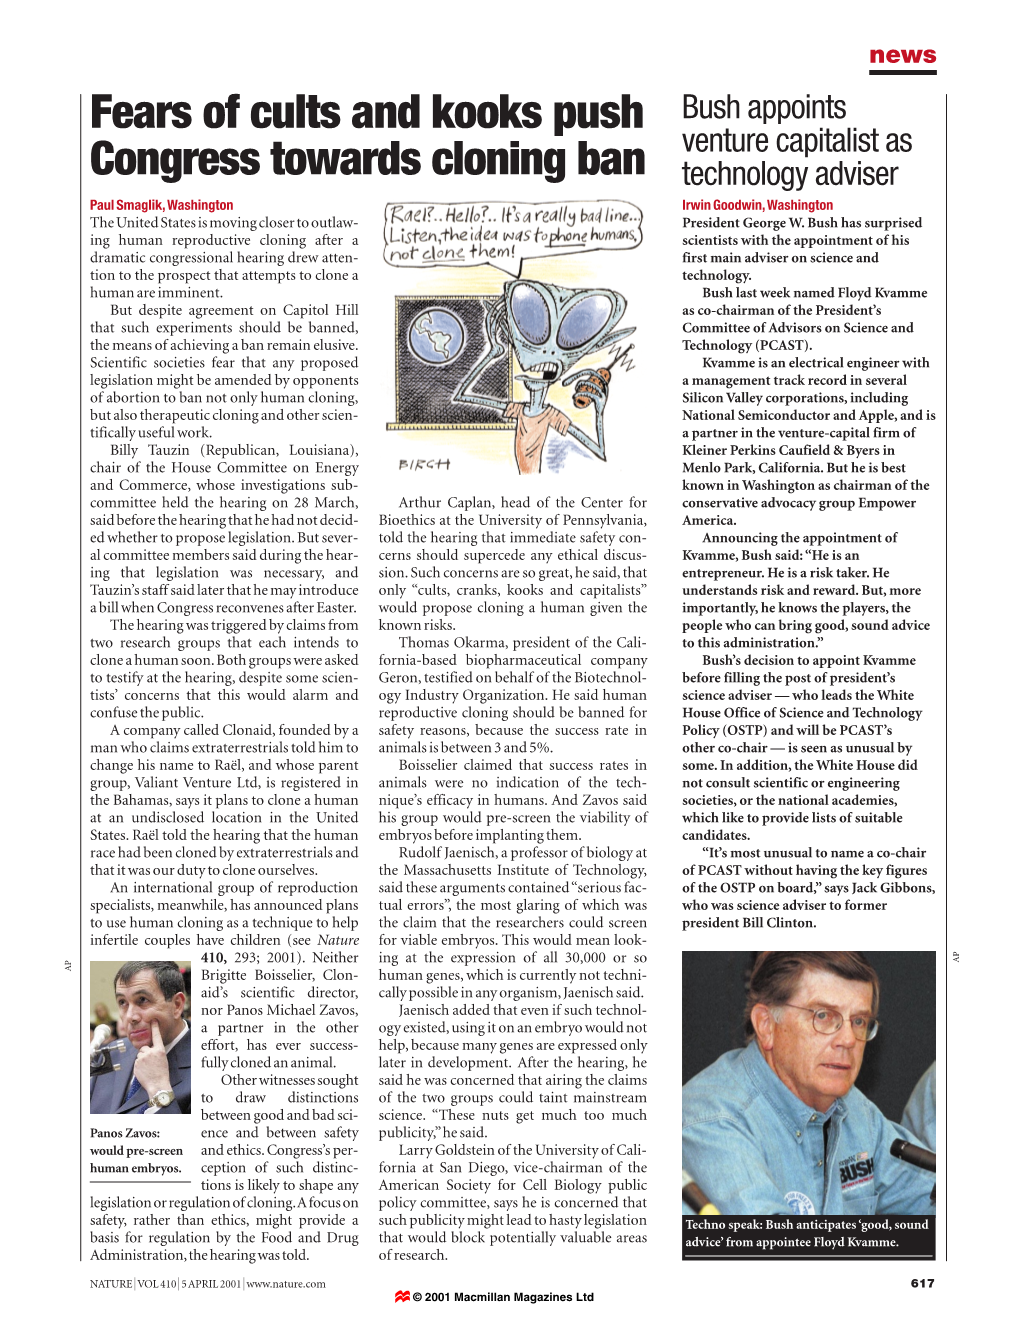 Fears of Cults and Kooks Push Congress Towards Cloning